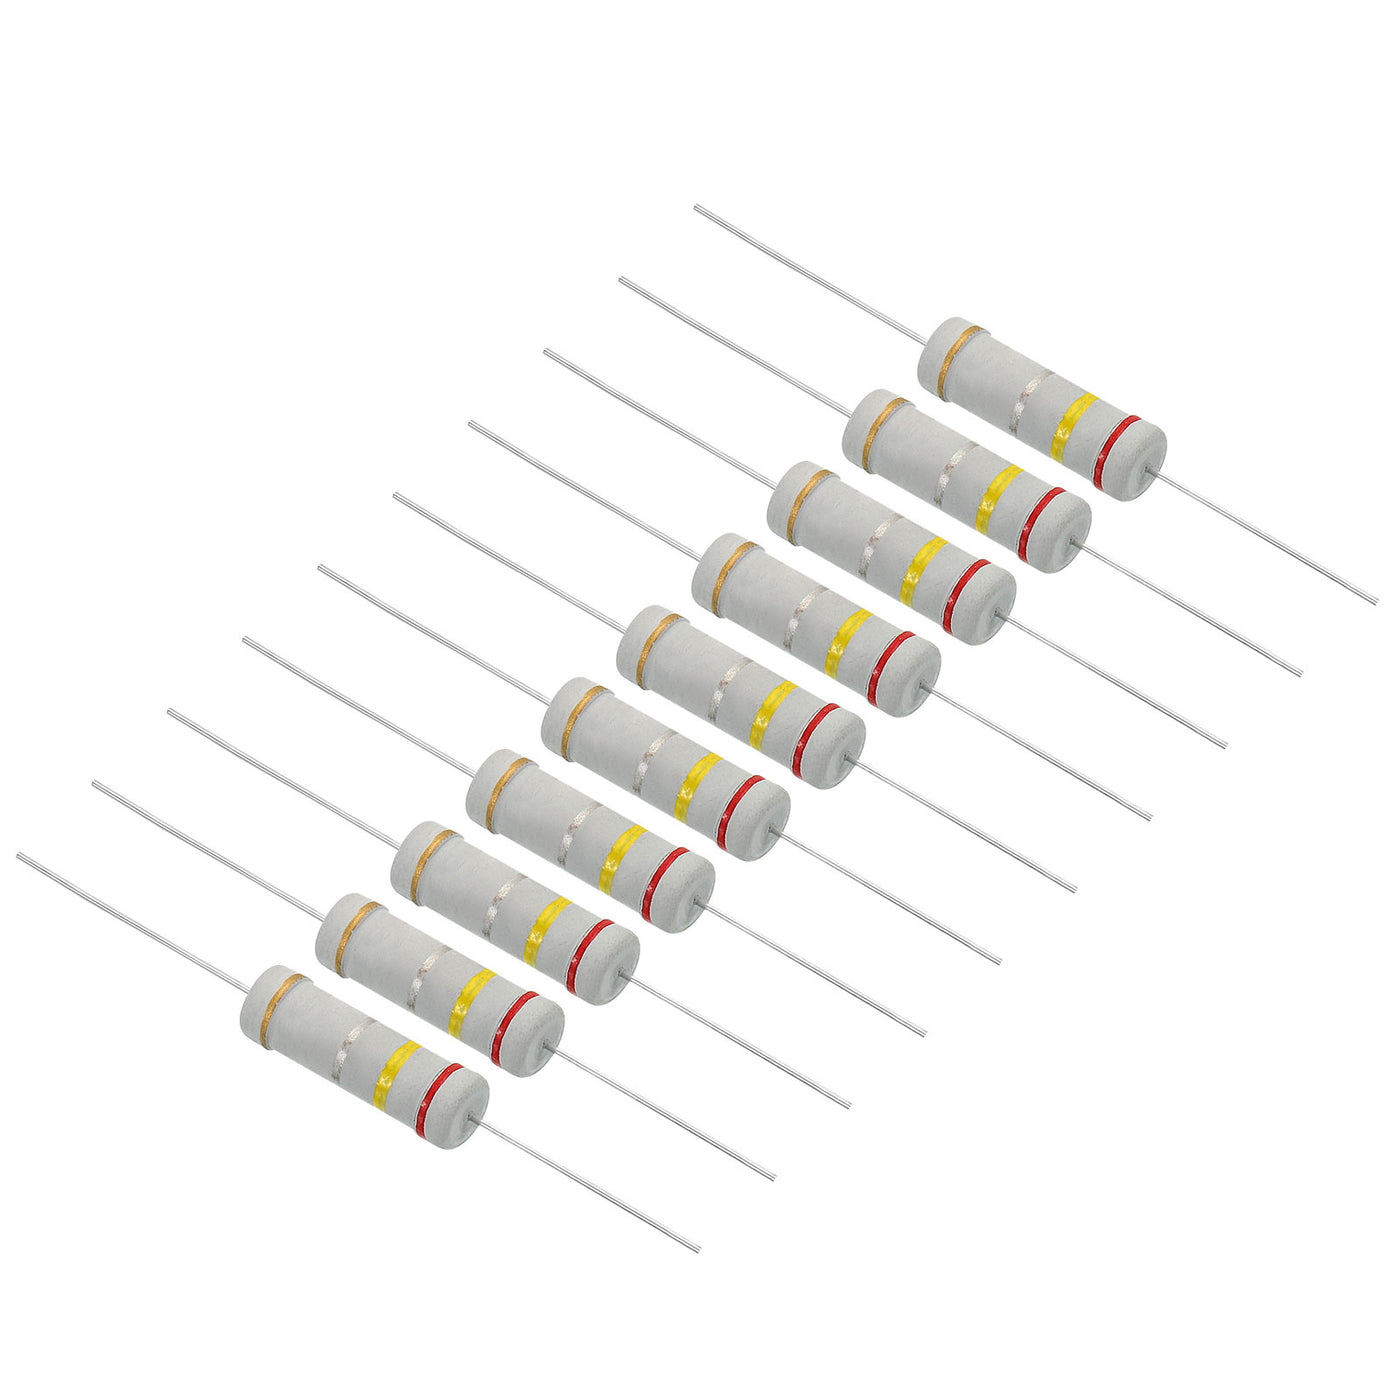 Harfington 5Watt 0.24 Ohm Carbon Film Resistor, 20 Pcs 5% Tolerance Resistors Axial Lead Colored Ring for DIY Projects and Experiments